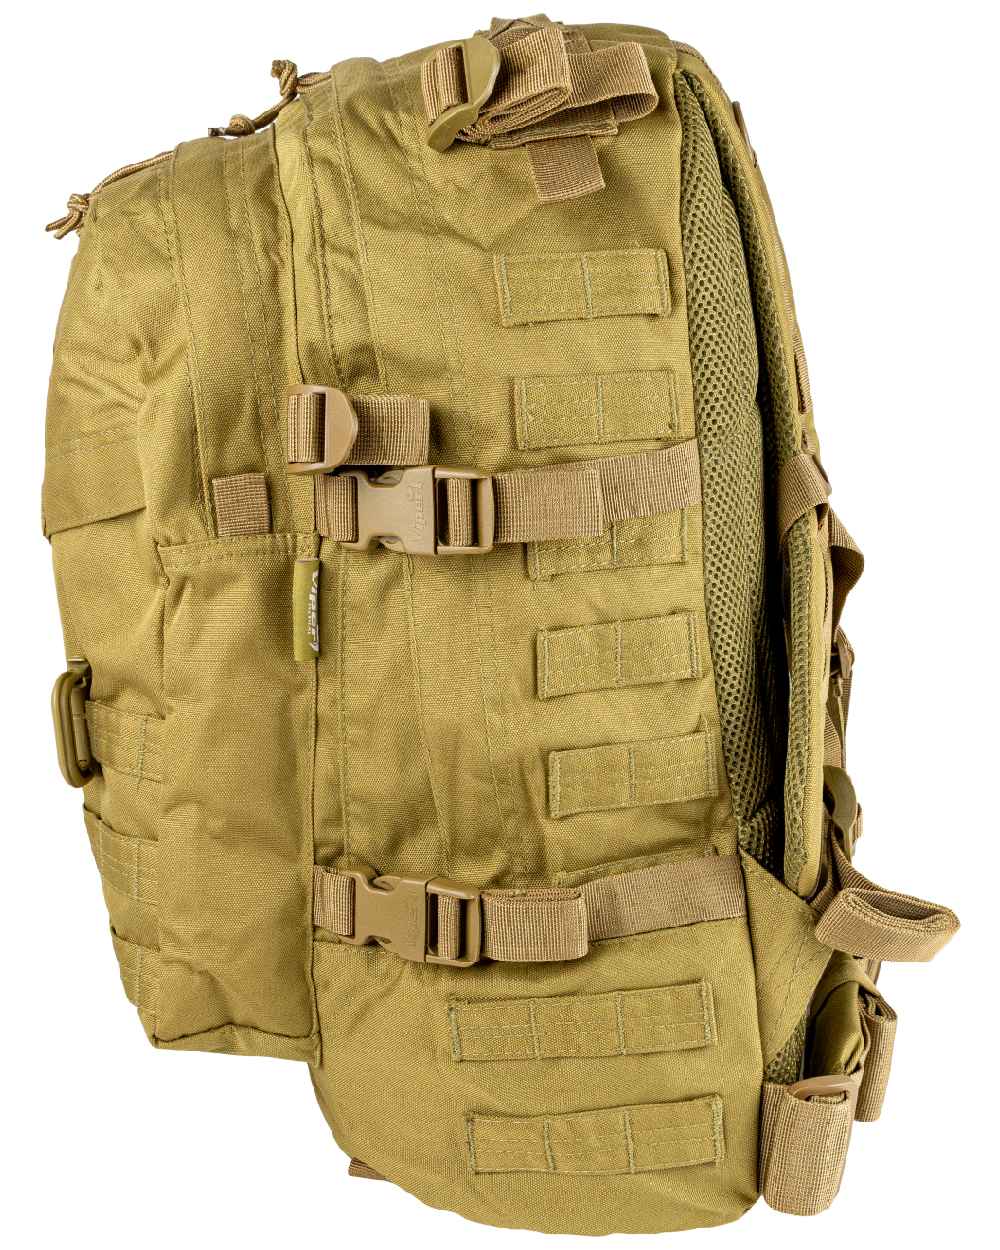 Viper Special Ops Pack in Coyote 